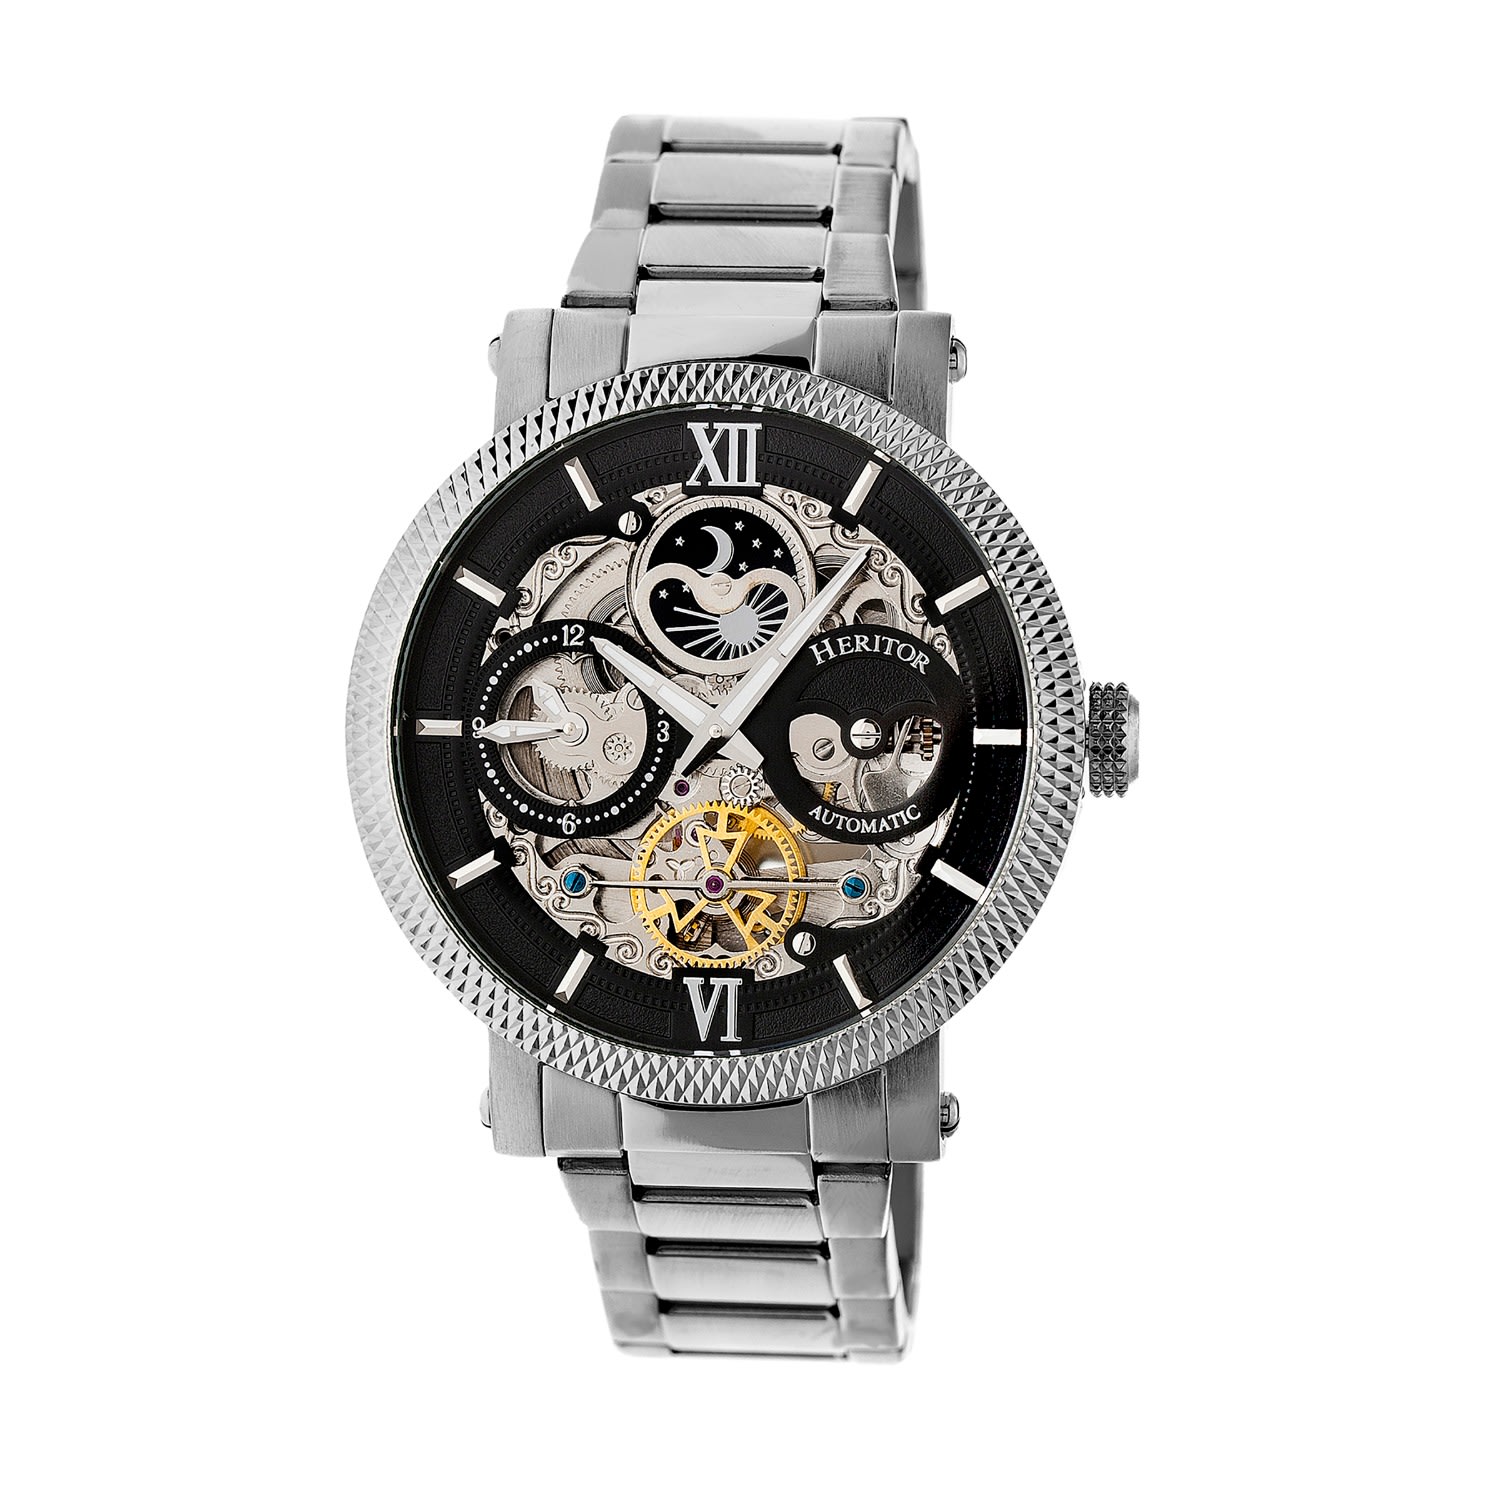 Heritor Automatic Men's Black / Silver Aries Skeleton Bracelet Watch With Moon Phase - Black, Silver In Metallic